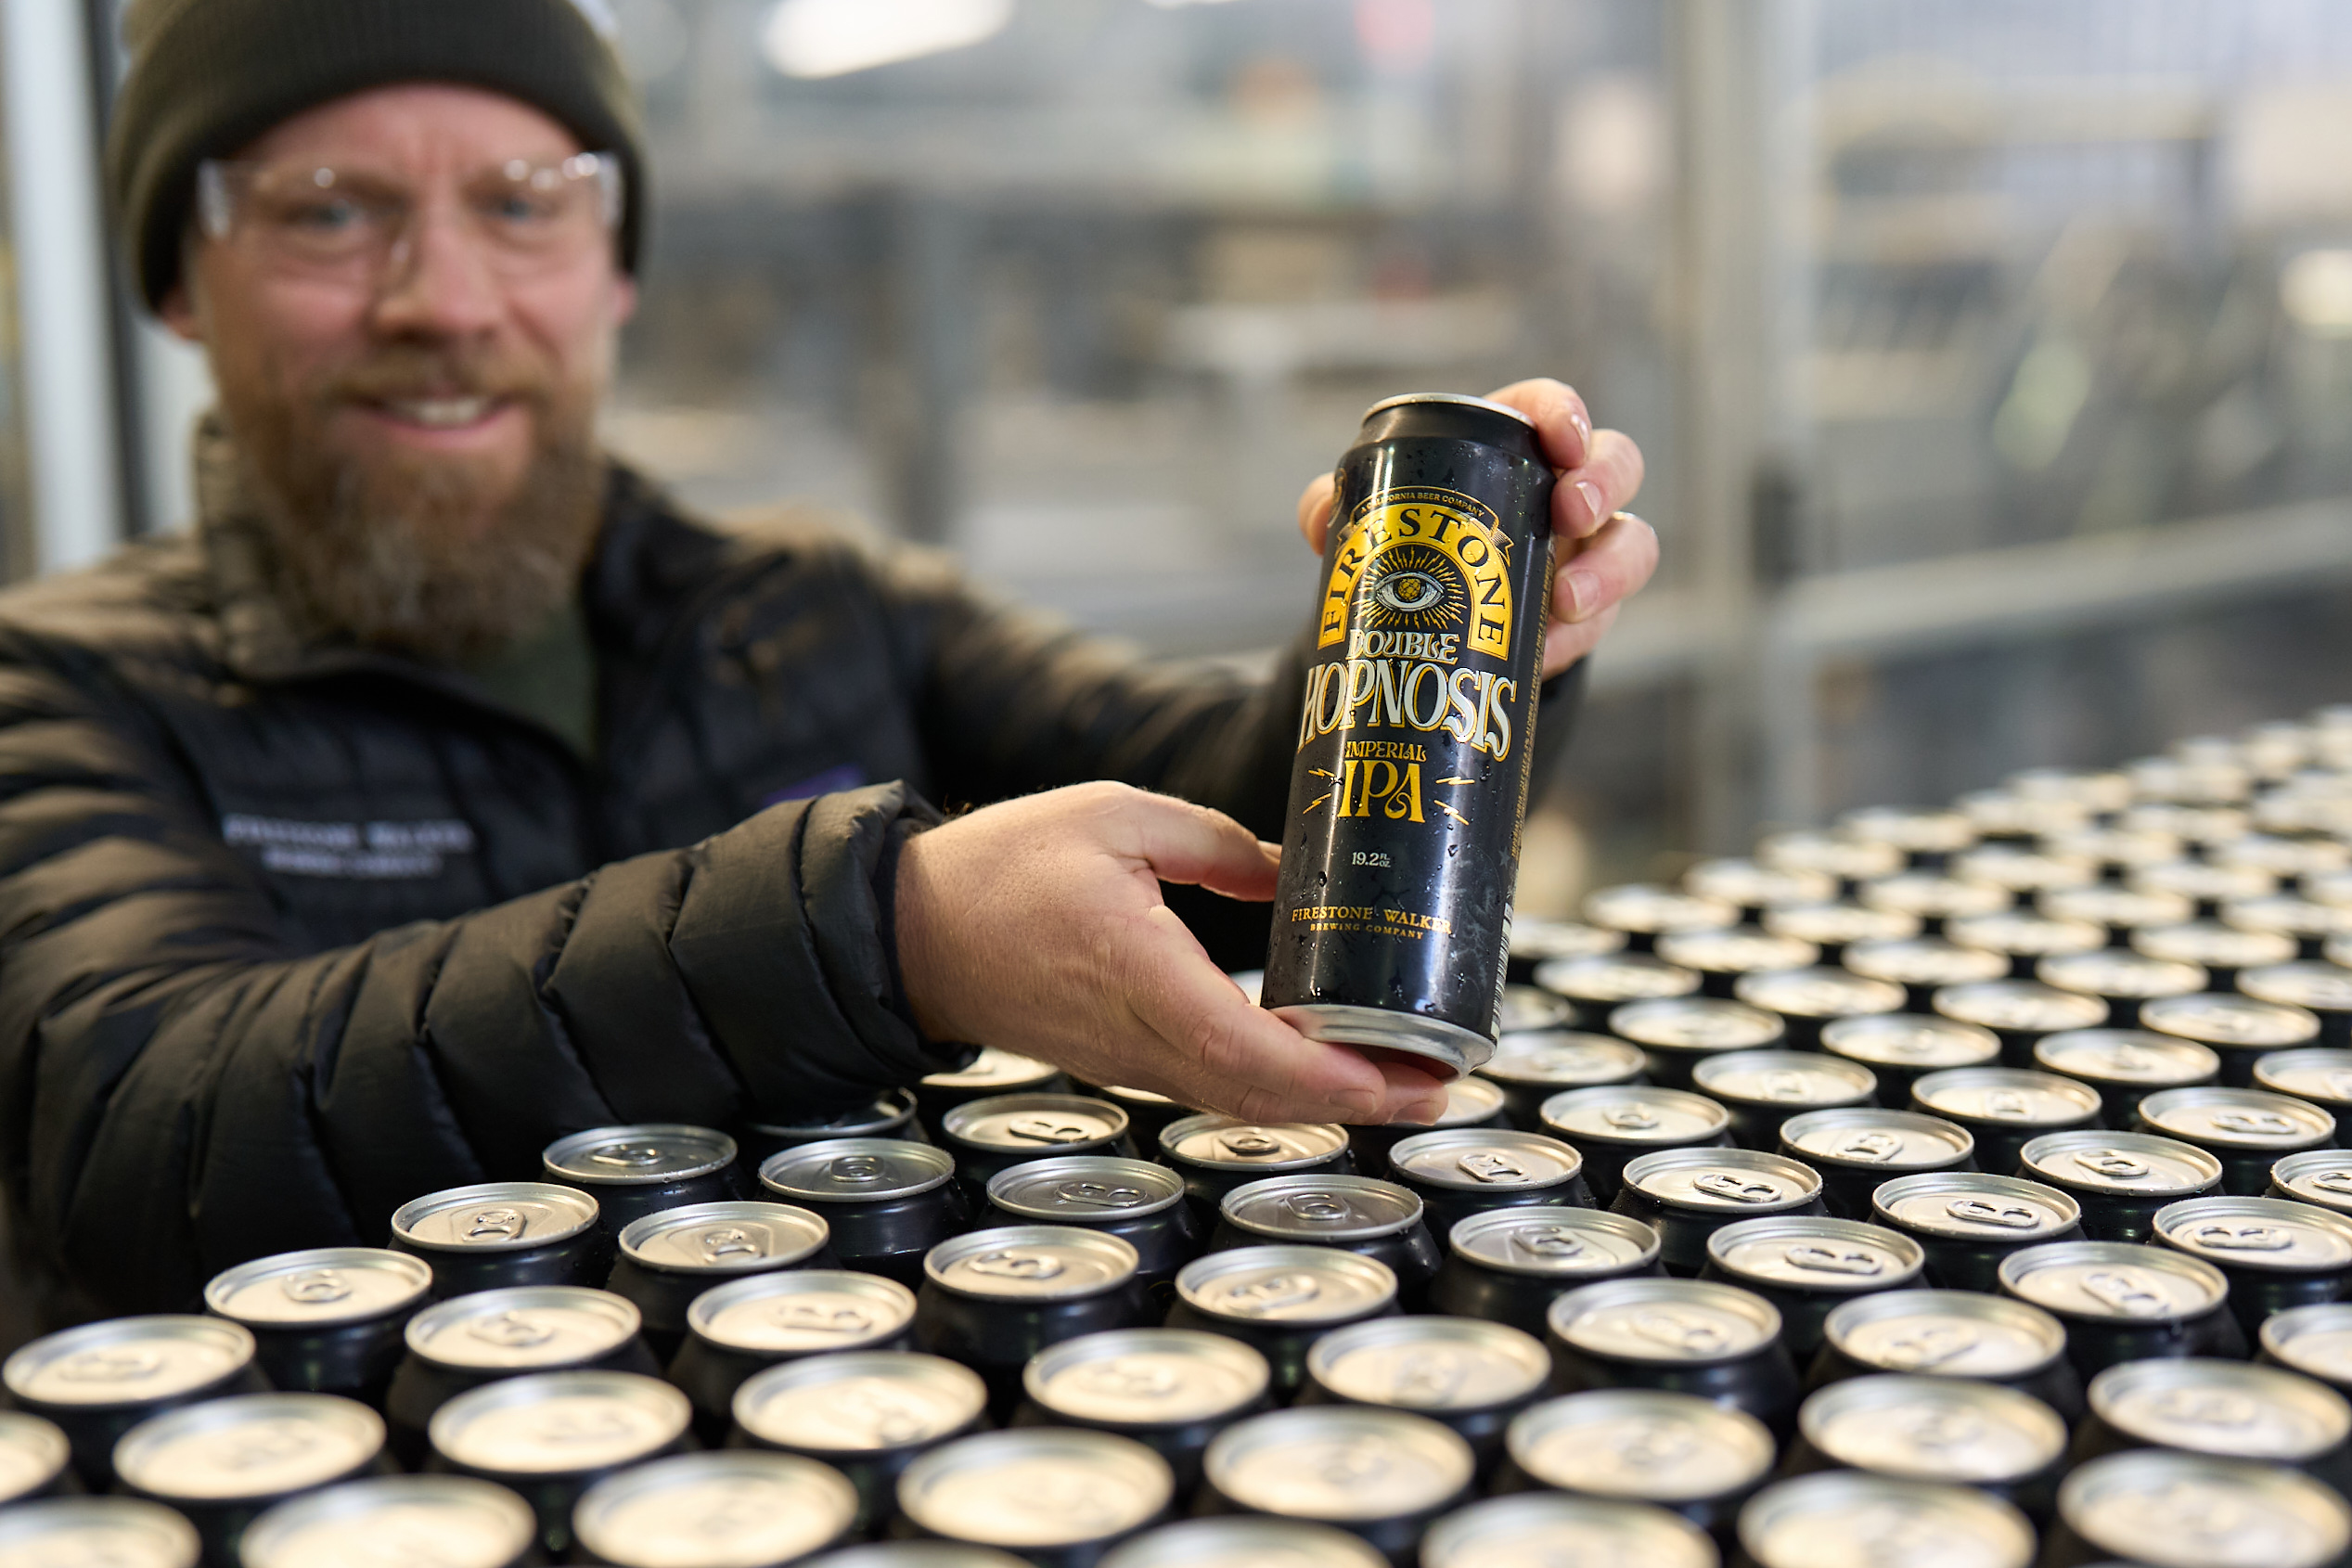 Matt Brynildson holding a freshly canned Double Hopnosis Imperial IPA. (image courtesy of Firestone Walker Brewing)